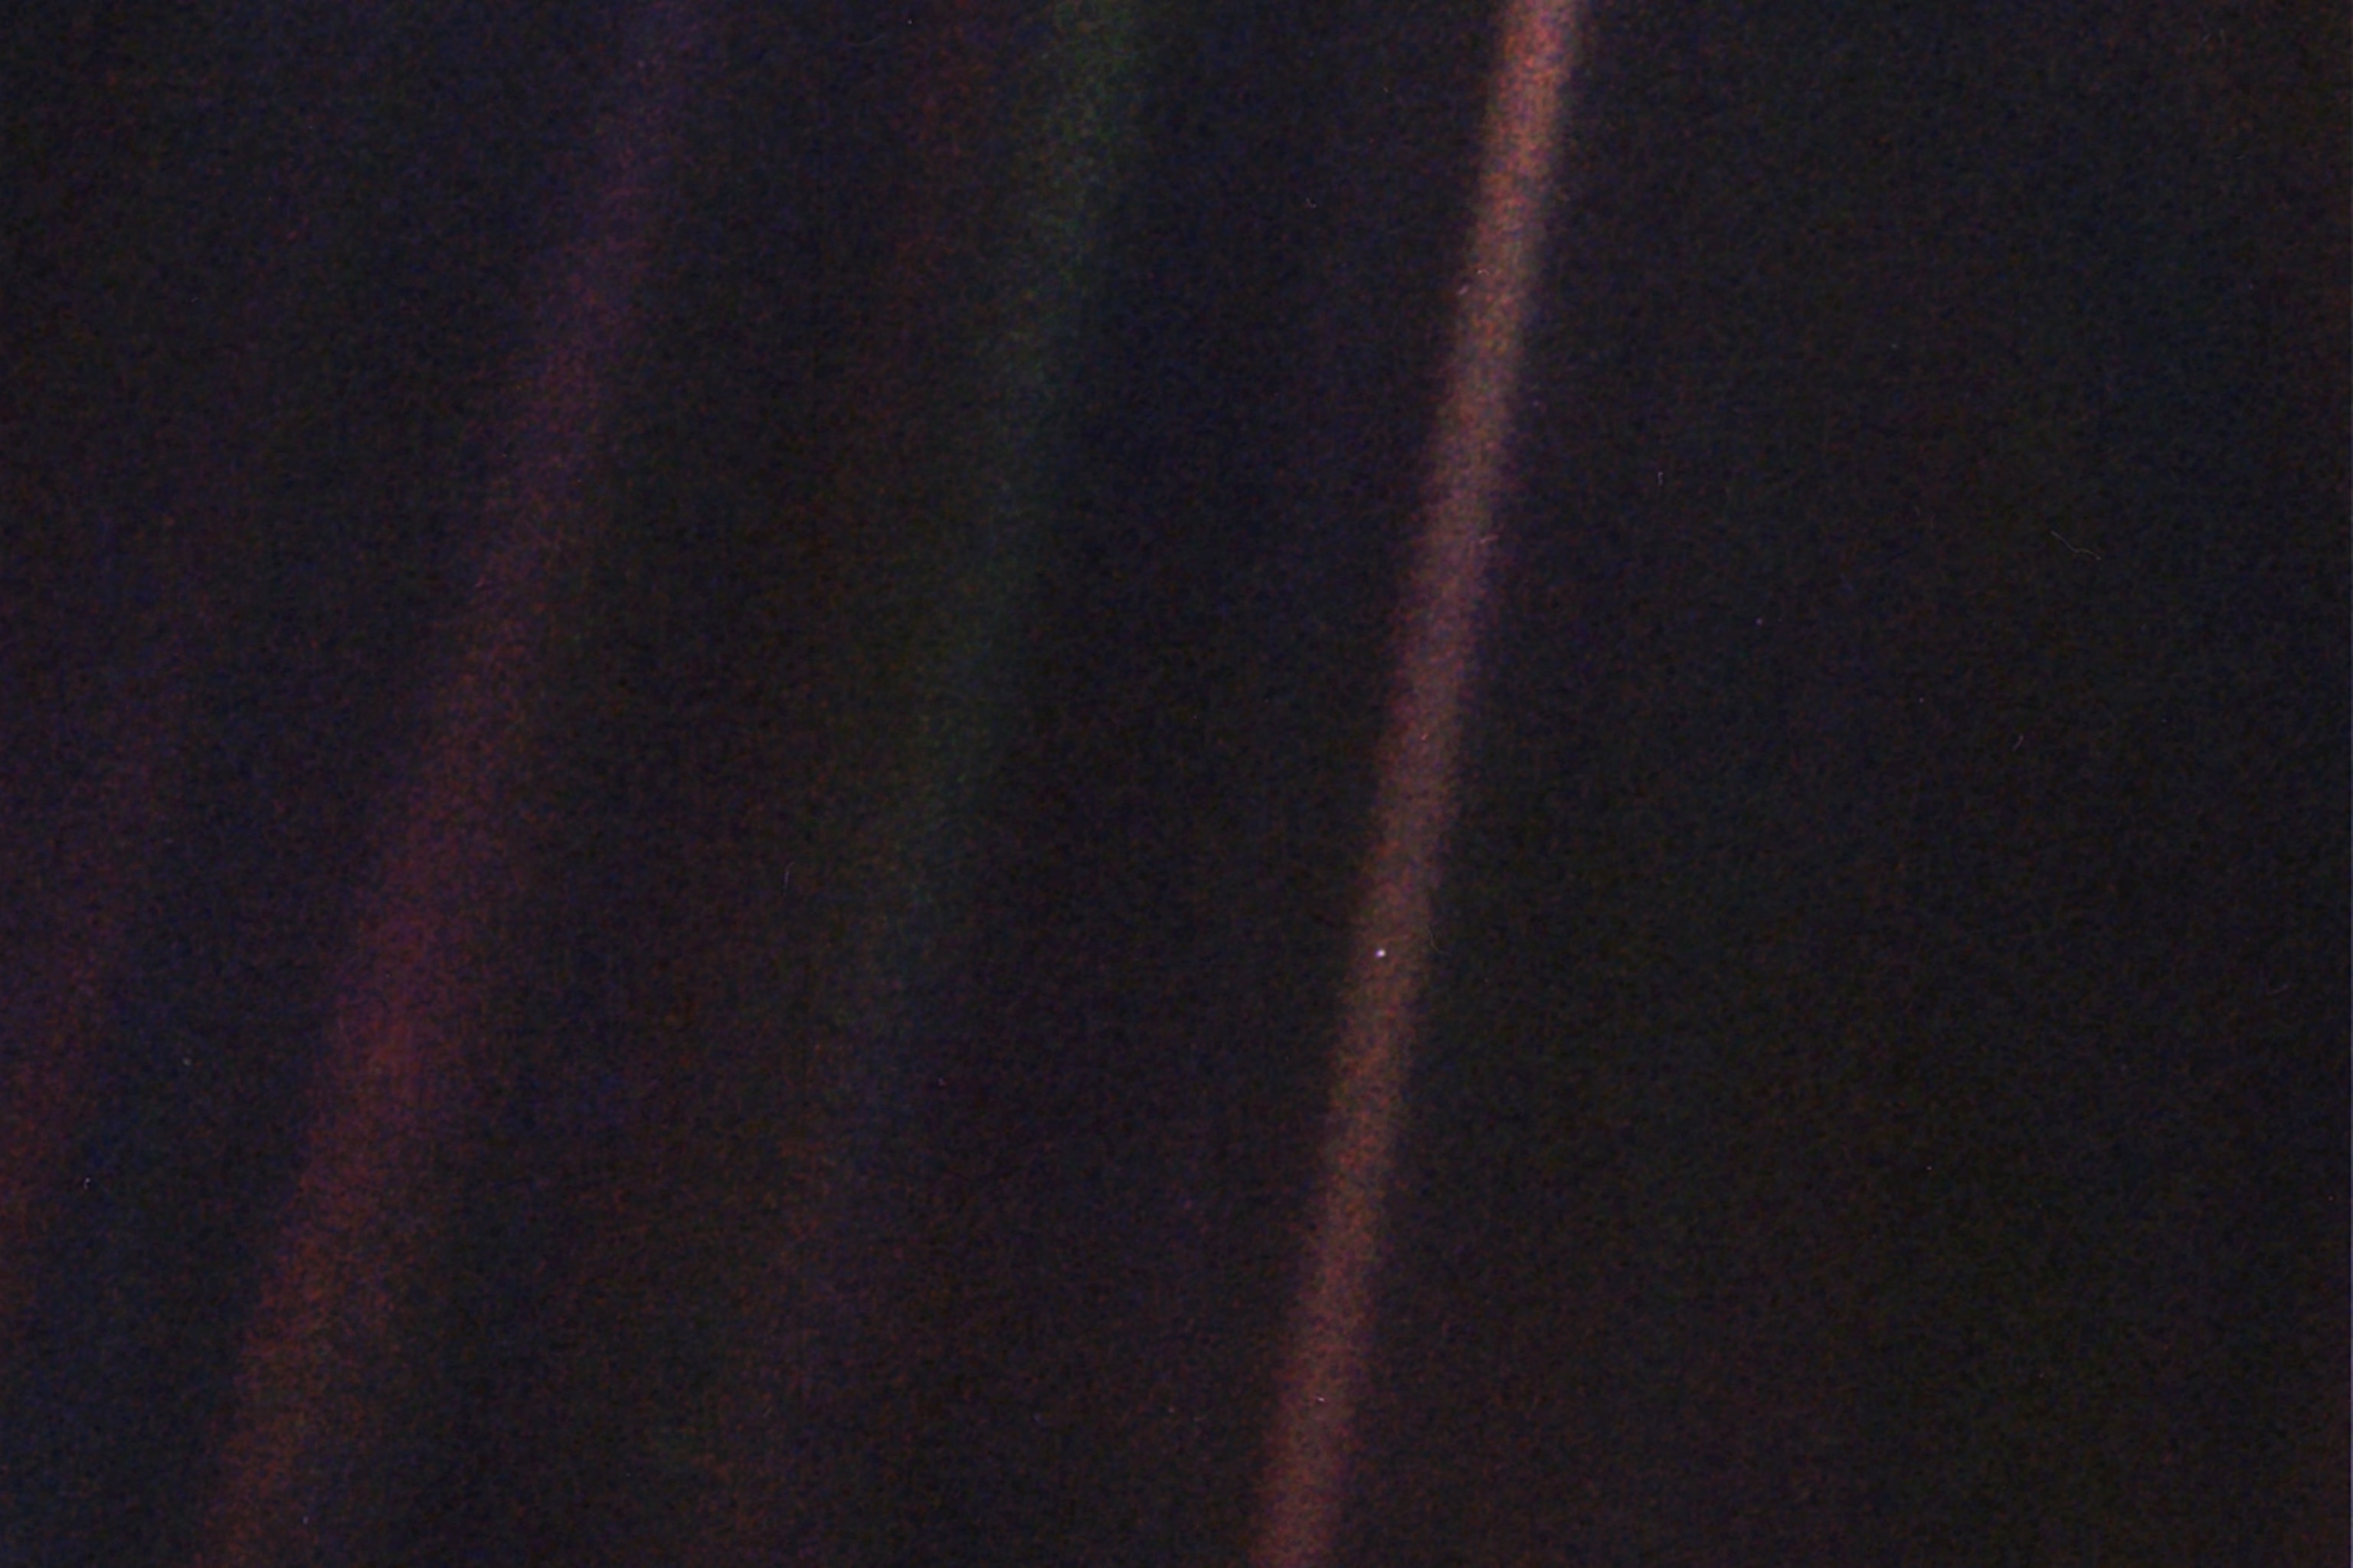 Pale Blue Dot Meet The Scientist Who First Saw Iconic Nasa